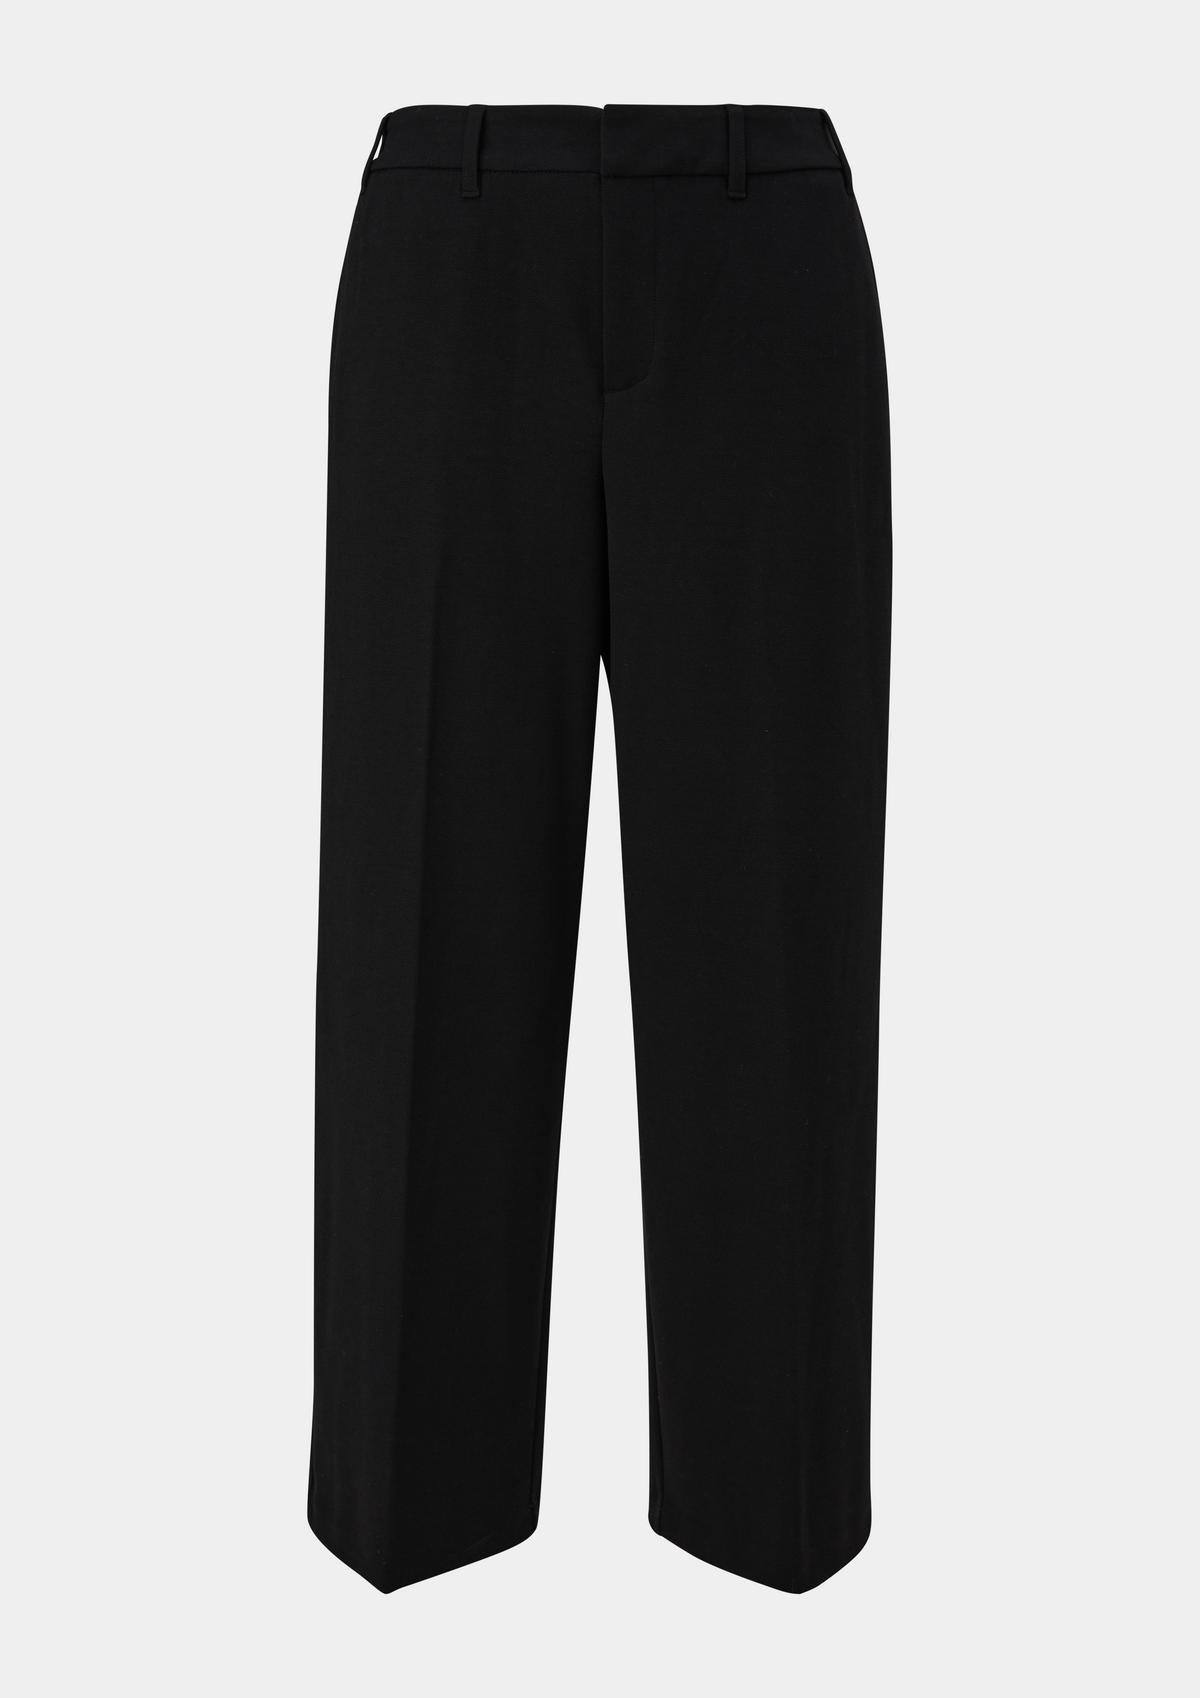 s.Oliver Interlock jersey trousers with a wide leg